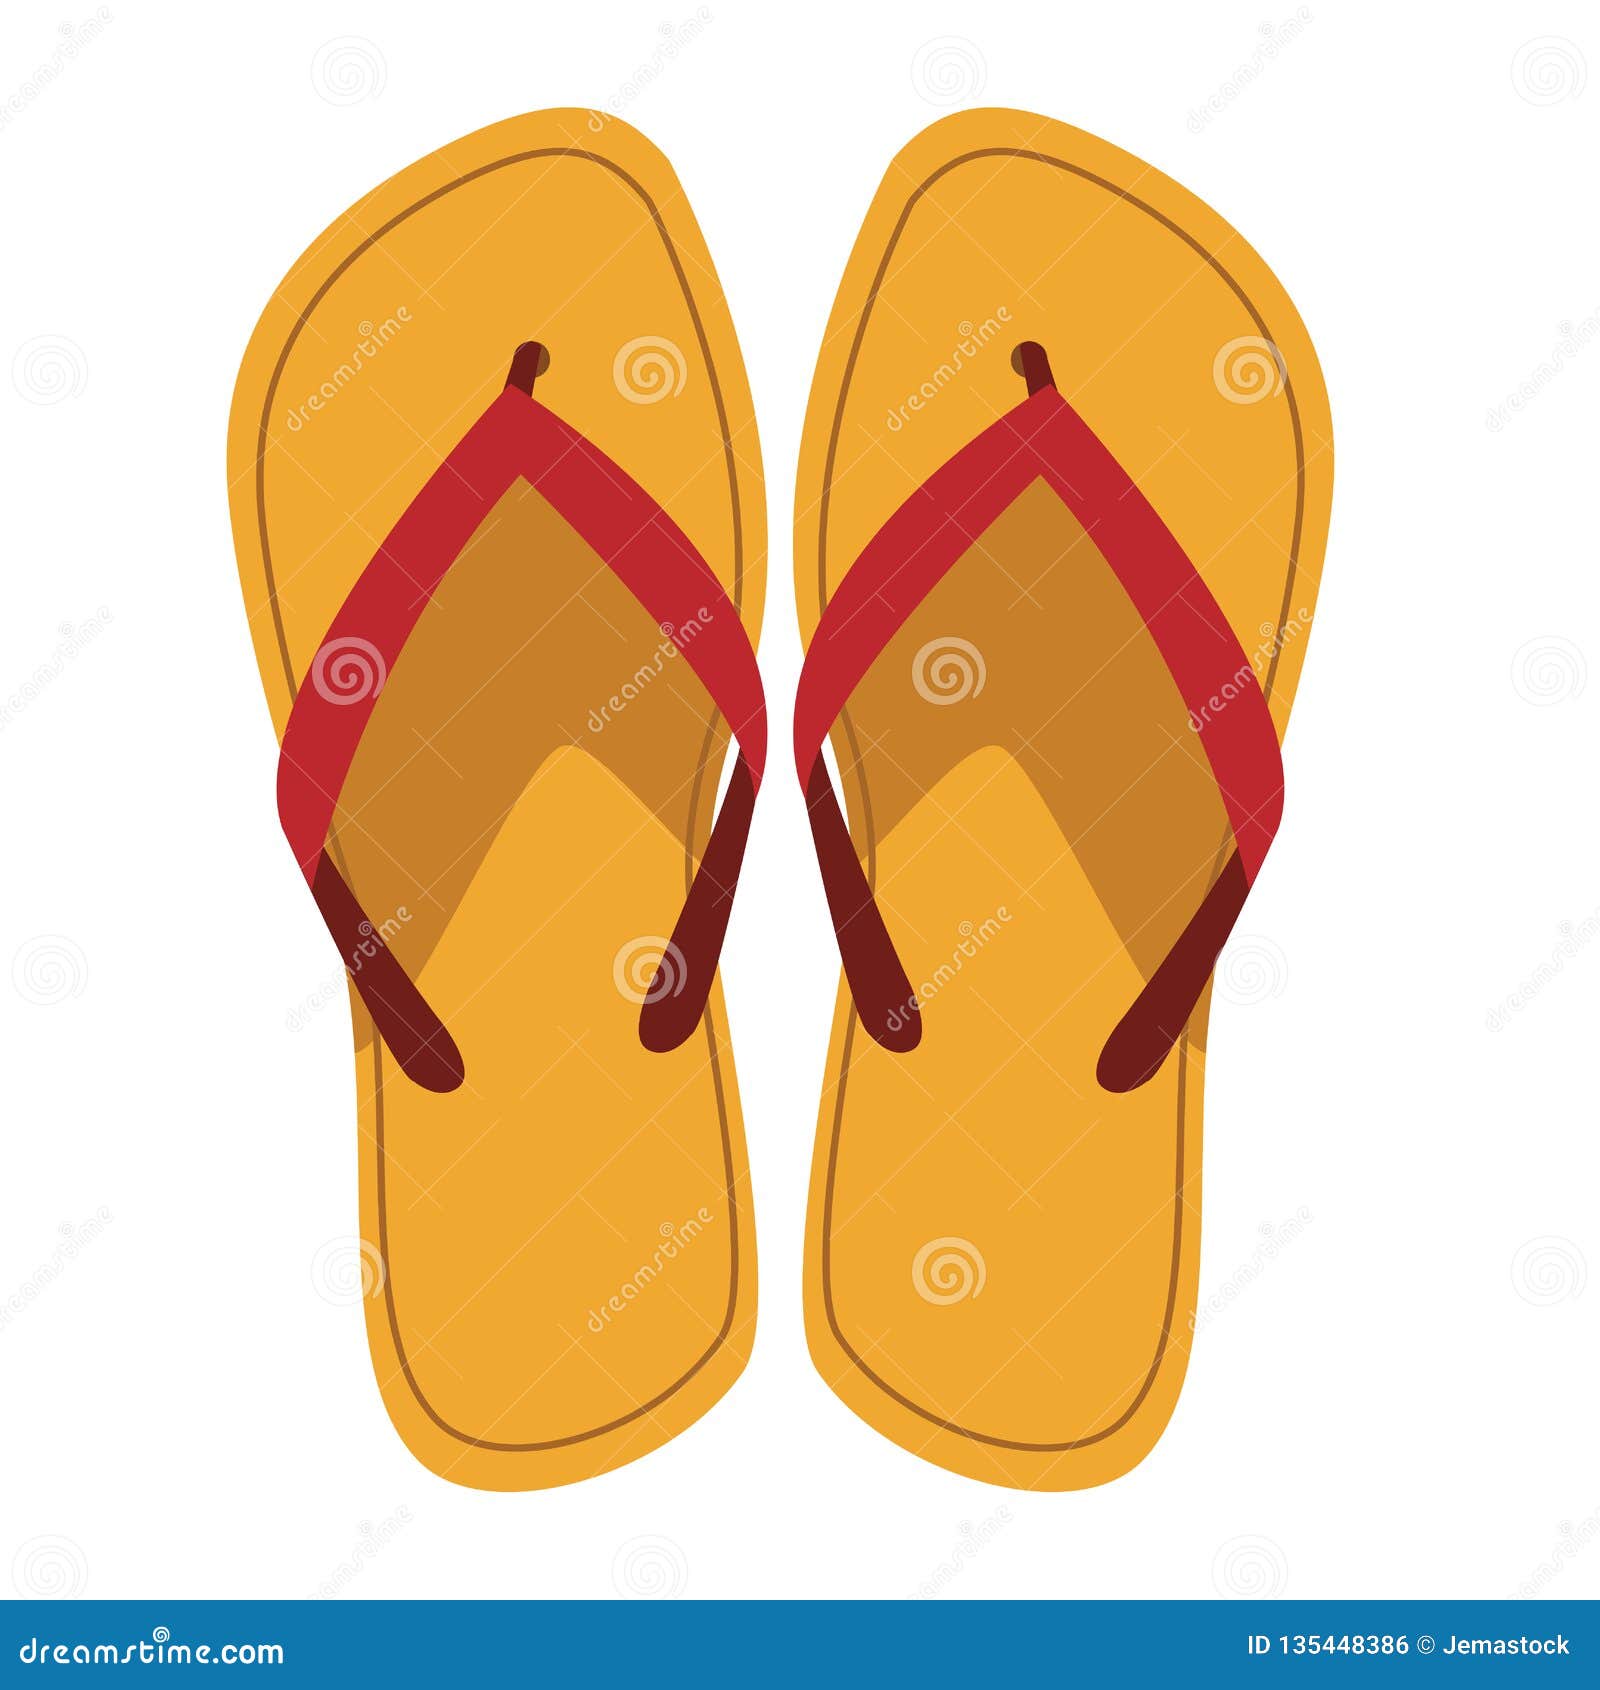 Flips flops icon stock vector. Illustration of casual - 135448386